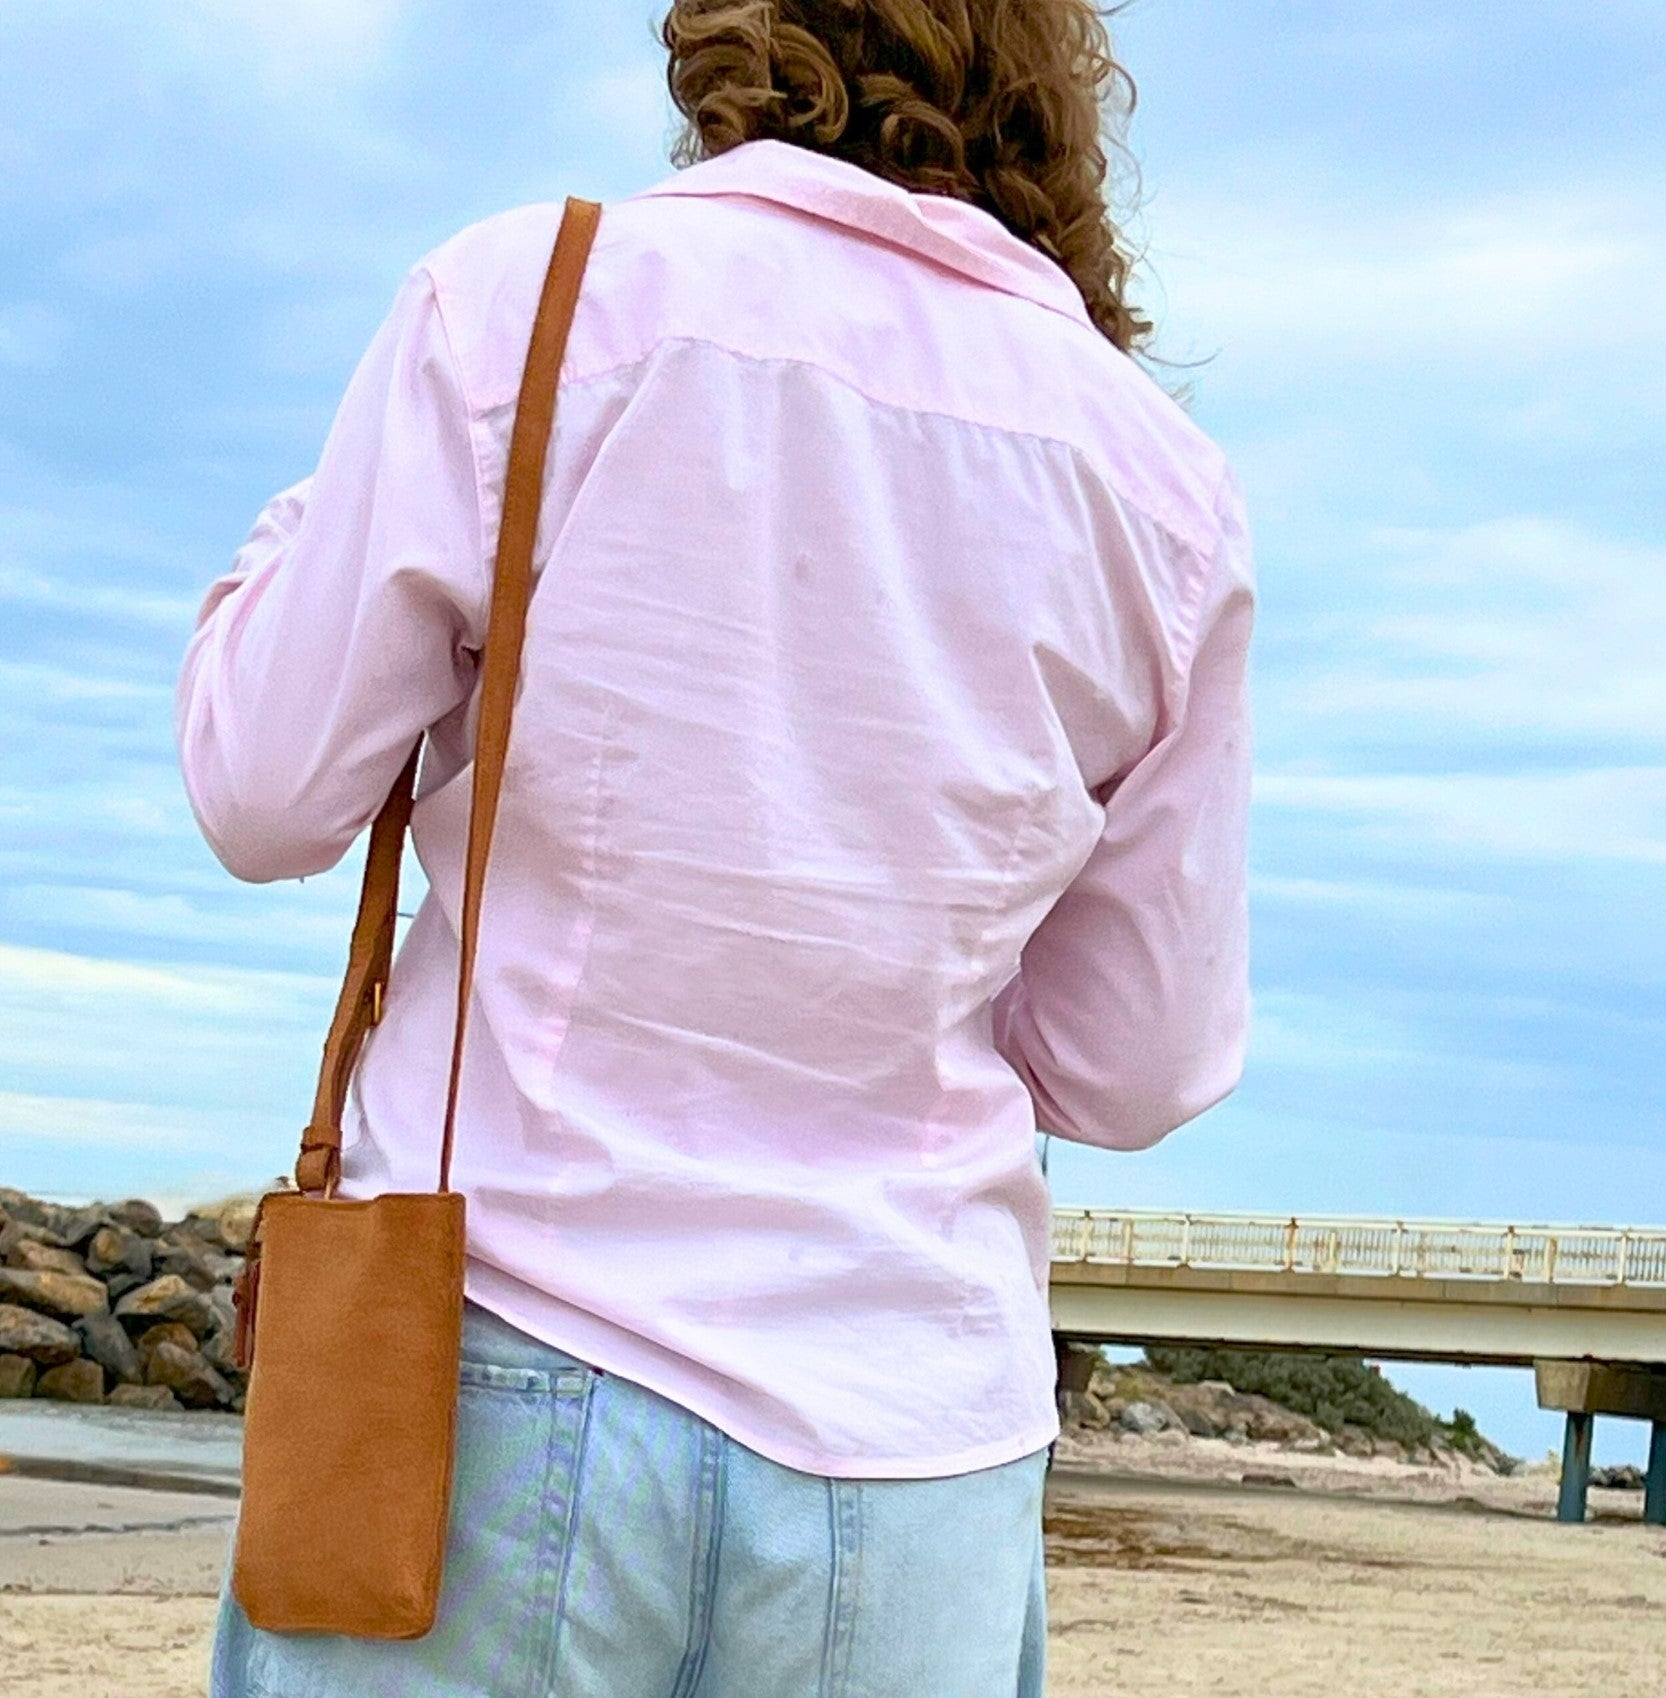 A person with curly hair seen from behind wearing a light pink shirt and light blue jeans, holding a Georgie Paws Dog Walk Bag - Grass, with a sandy beach and a pale sky in the background.